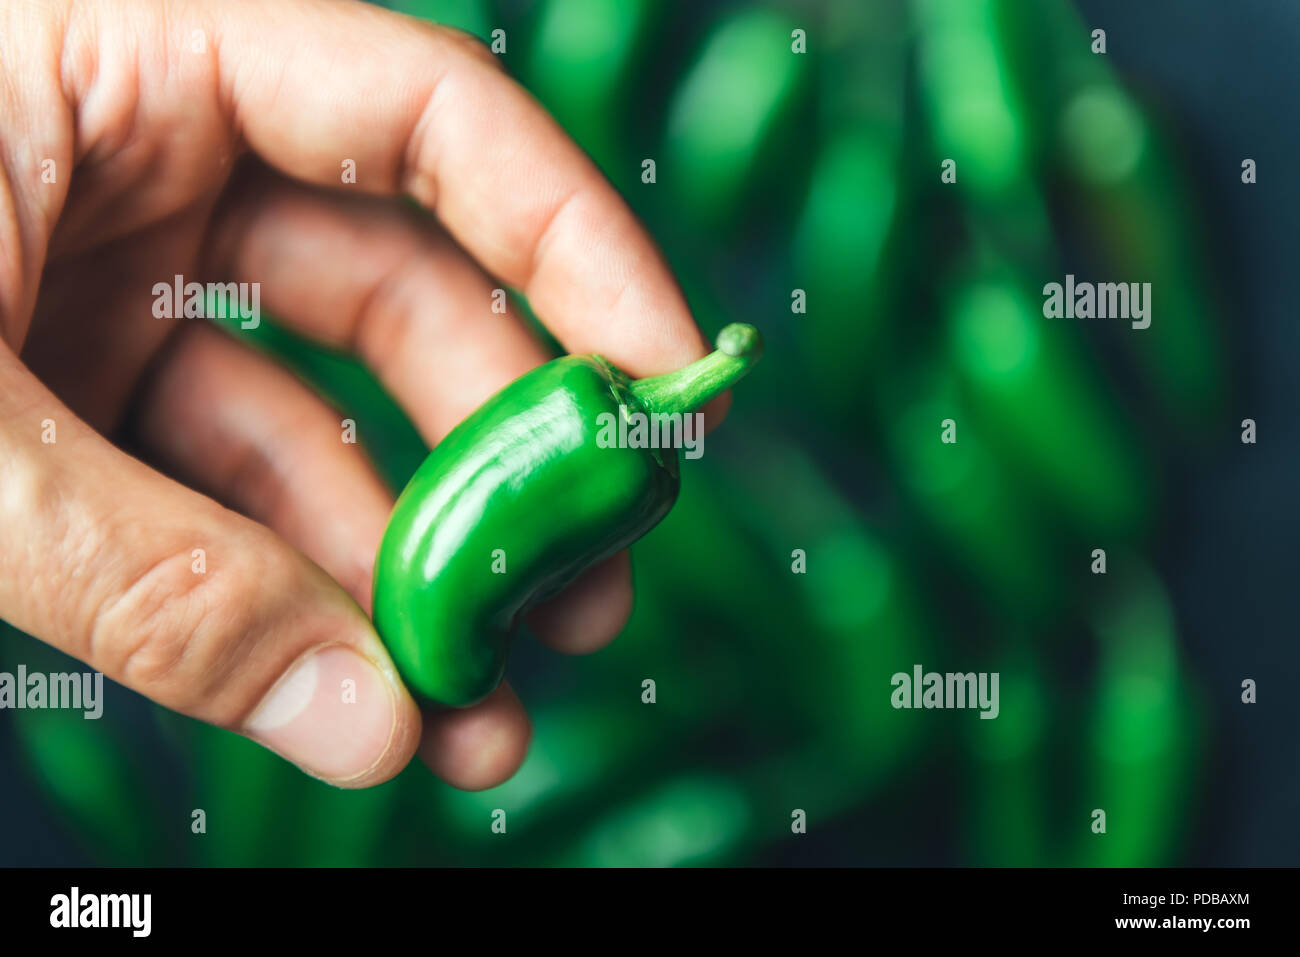 Green jalapeno hot pepper in hand closeup Stock Photo